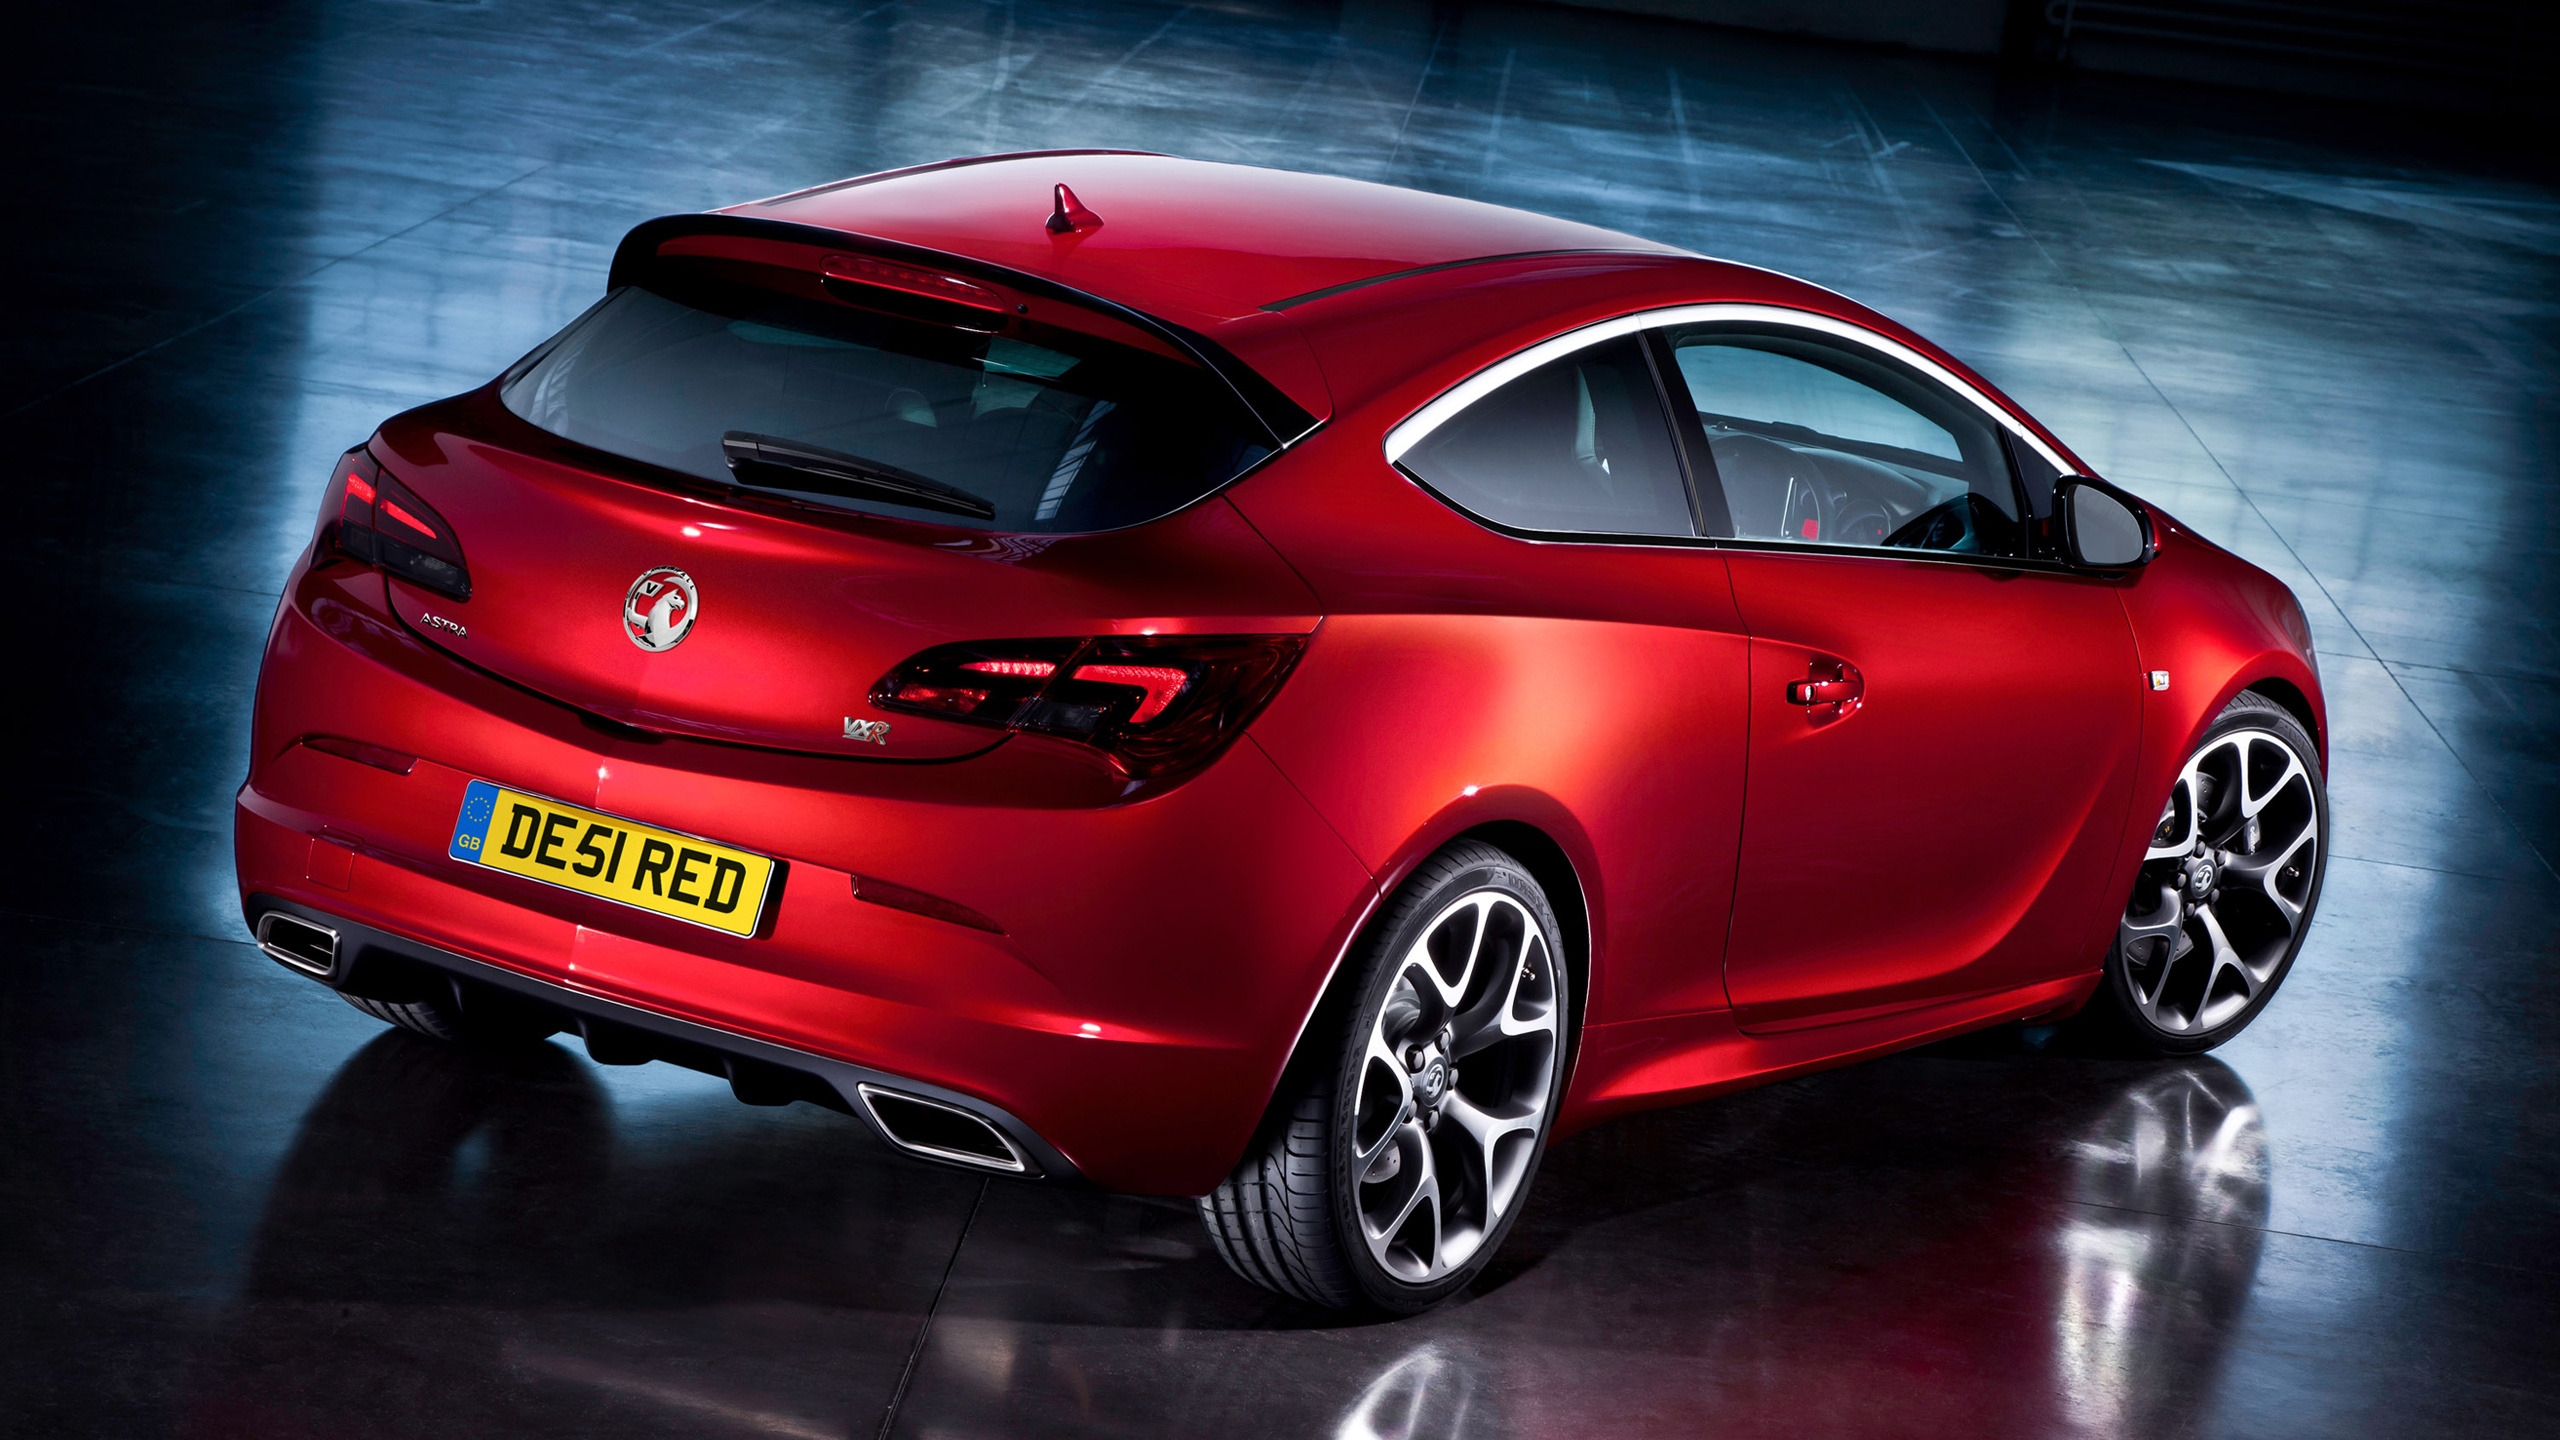 Vauxhall Astra GTC Rear for 2560x1440 HDTV resolution